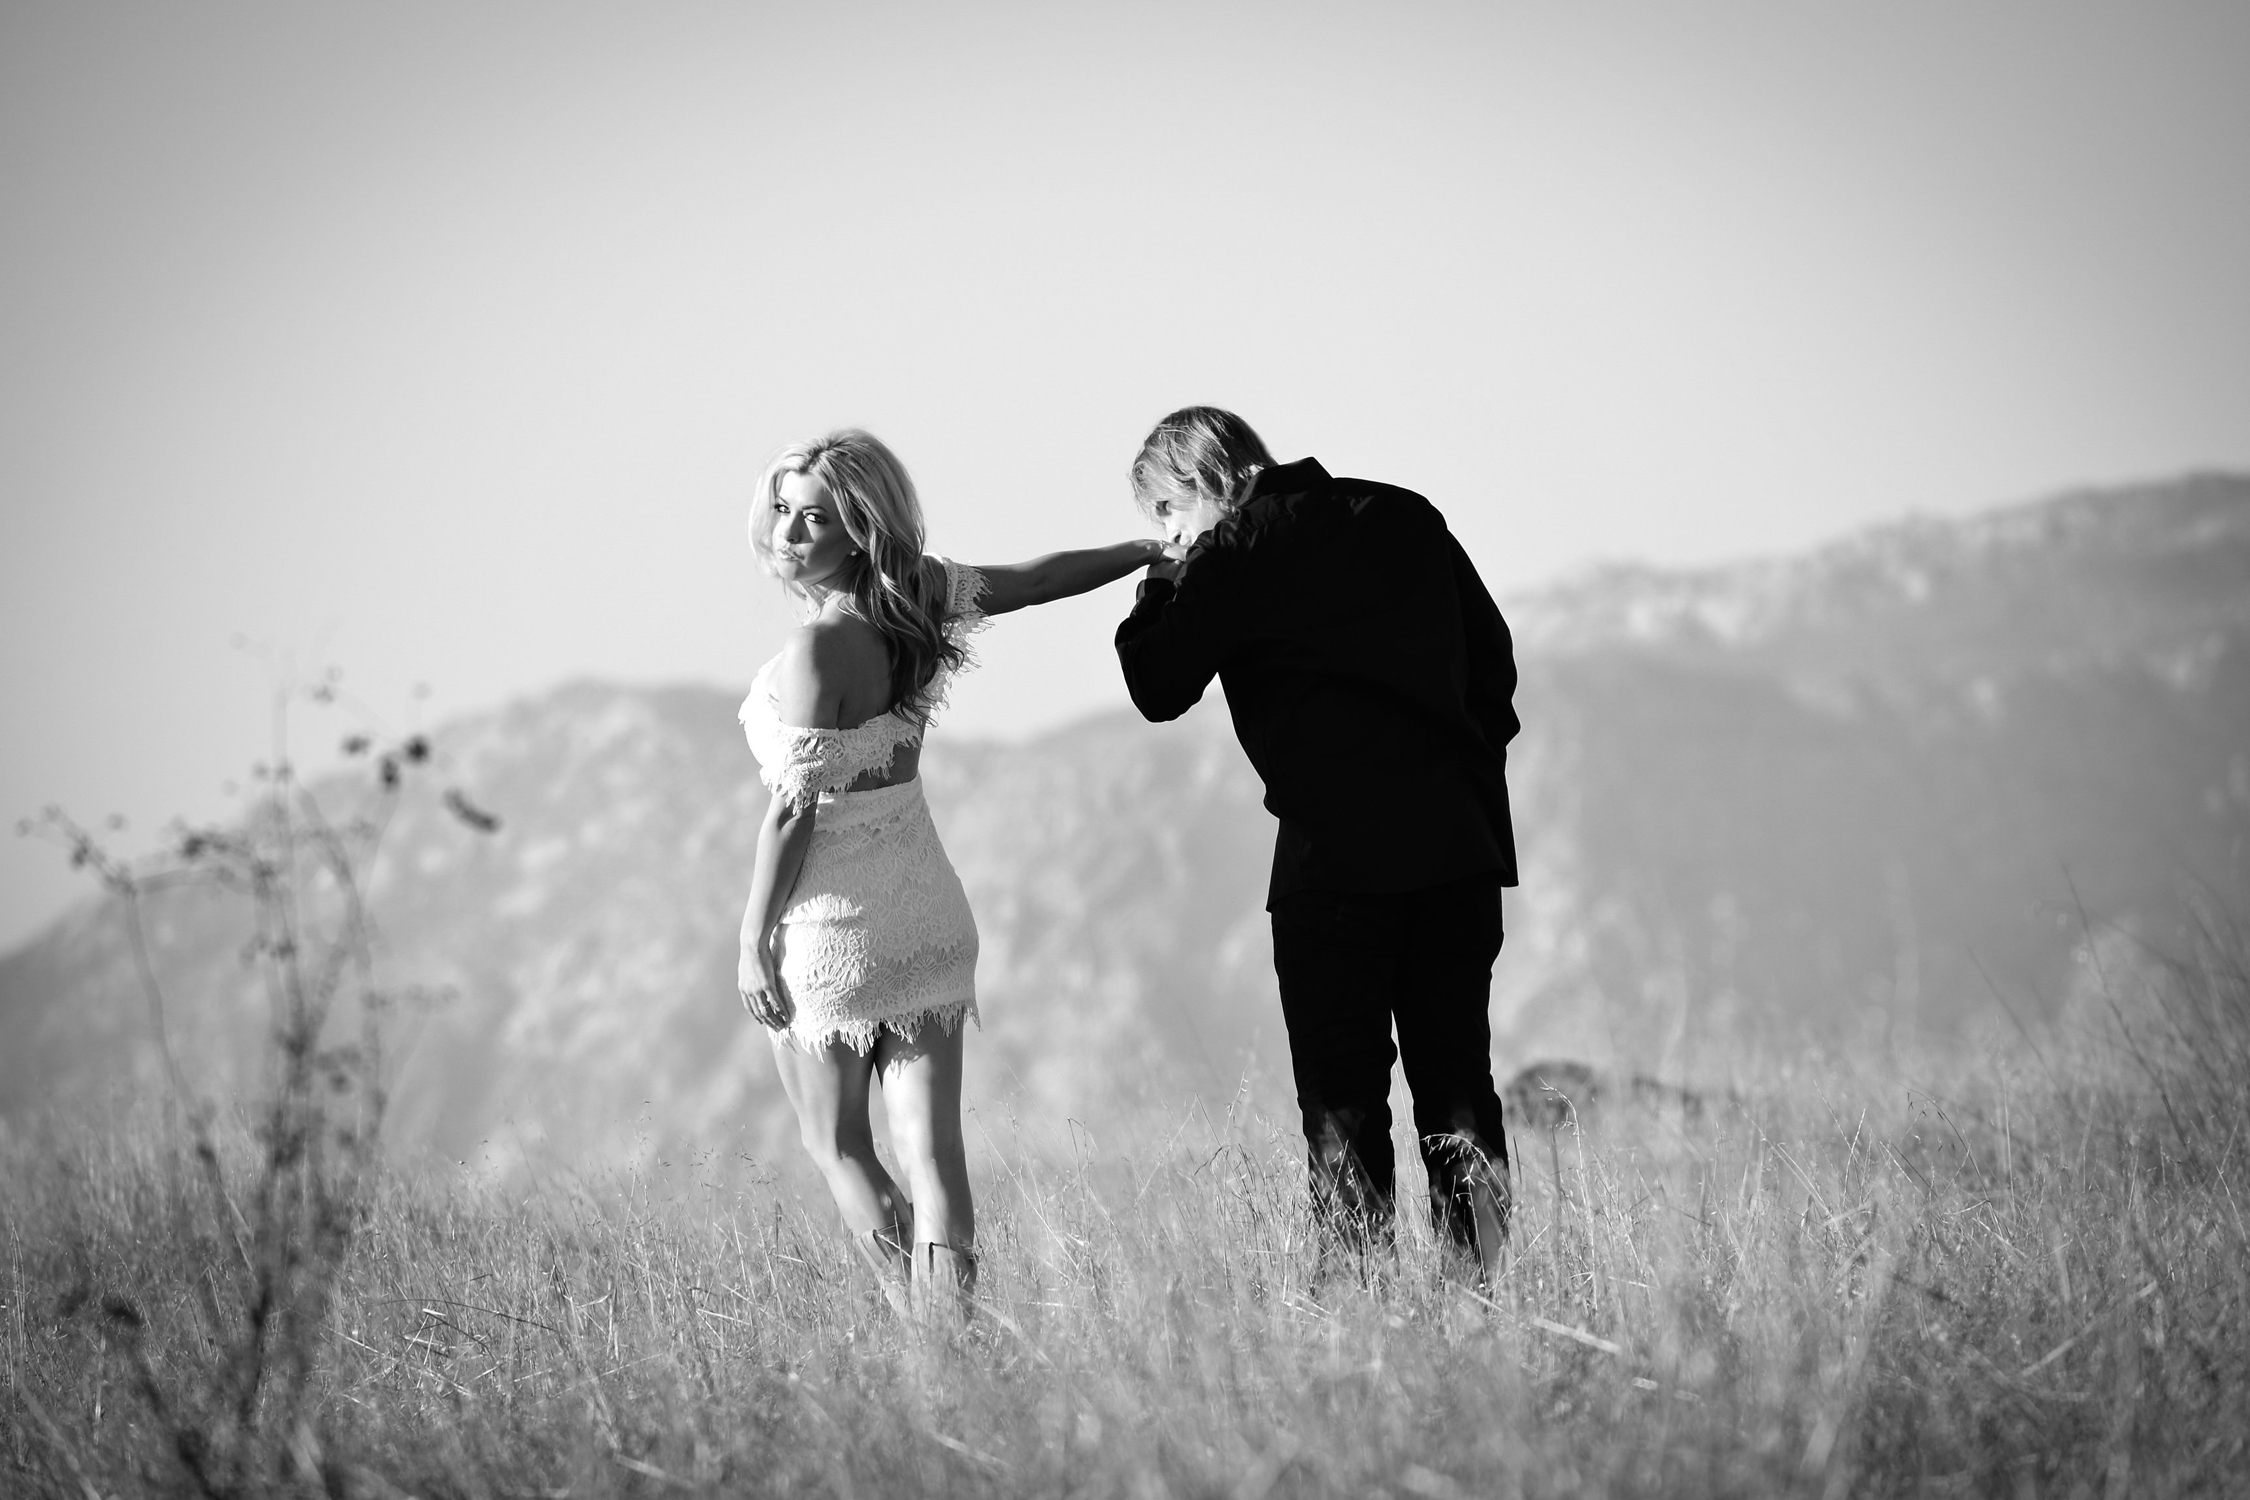 Andy-King-photography_engagement-session_shawna+ryan_web-002